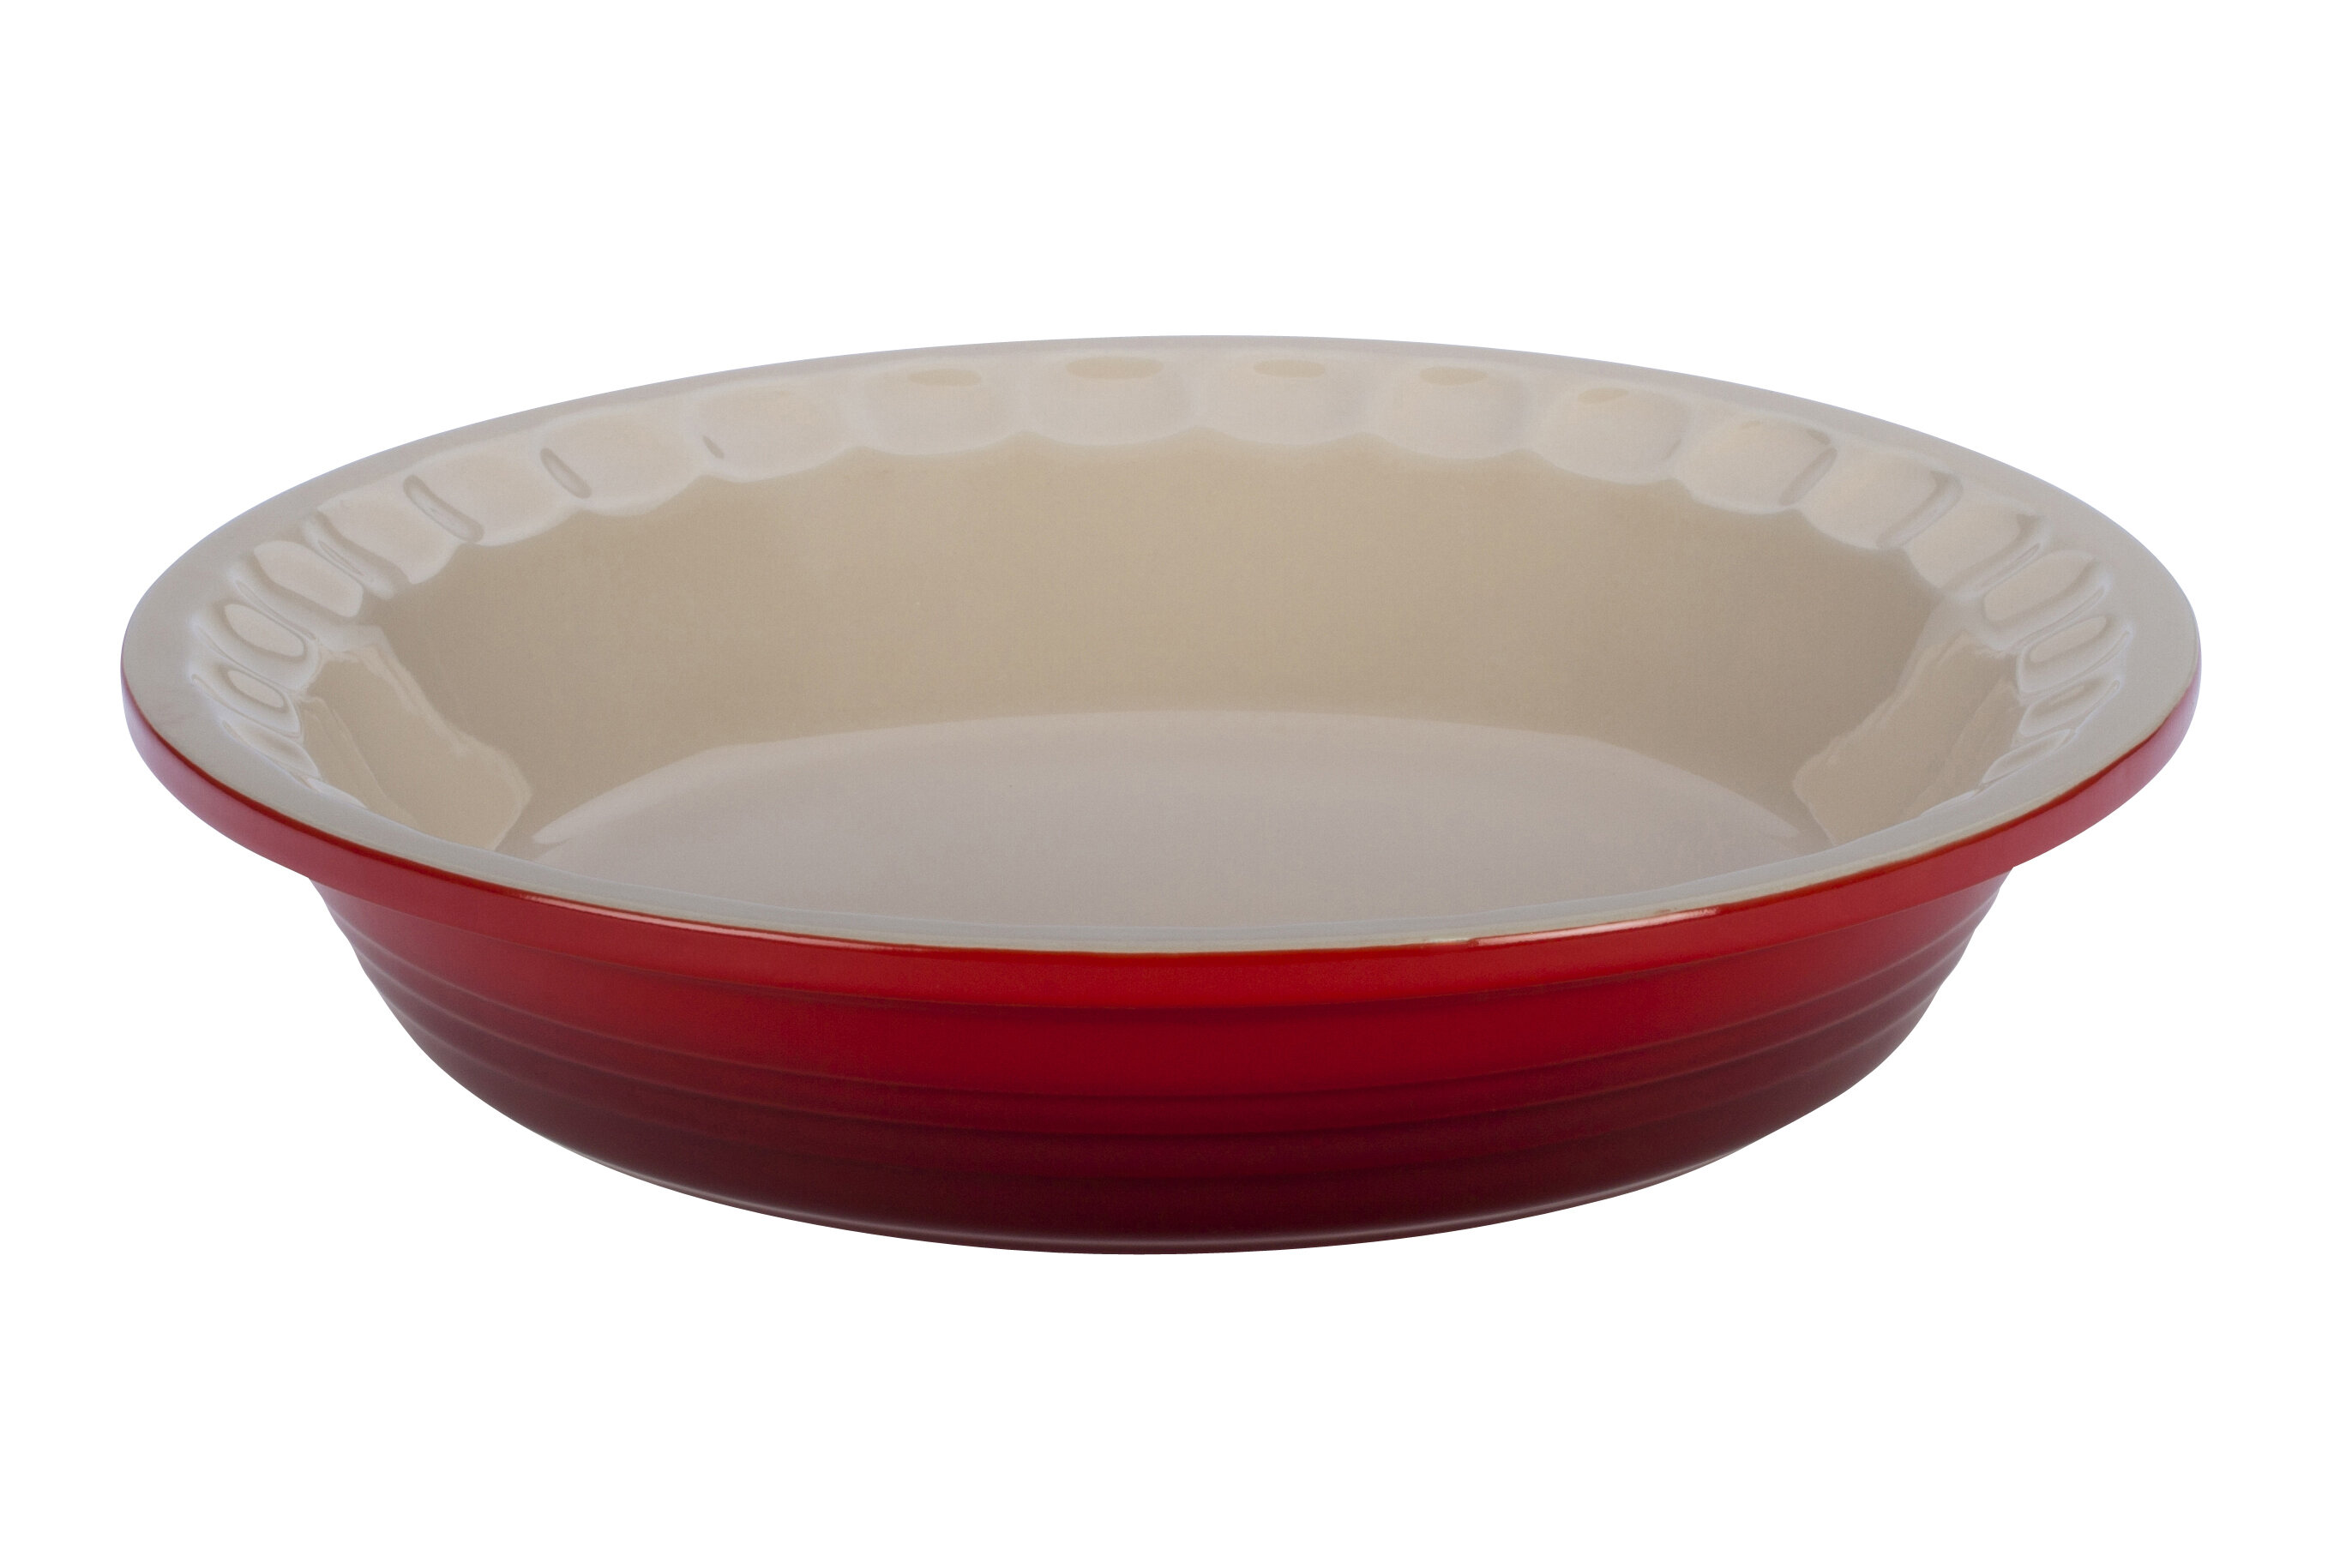 LE CREUSET 11.75" Red Pie Dish Round Baking Dish New